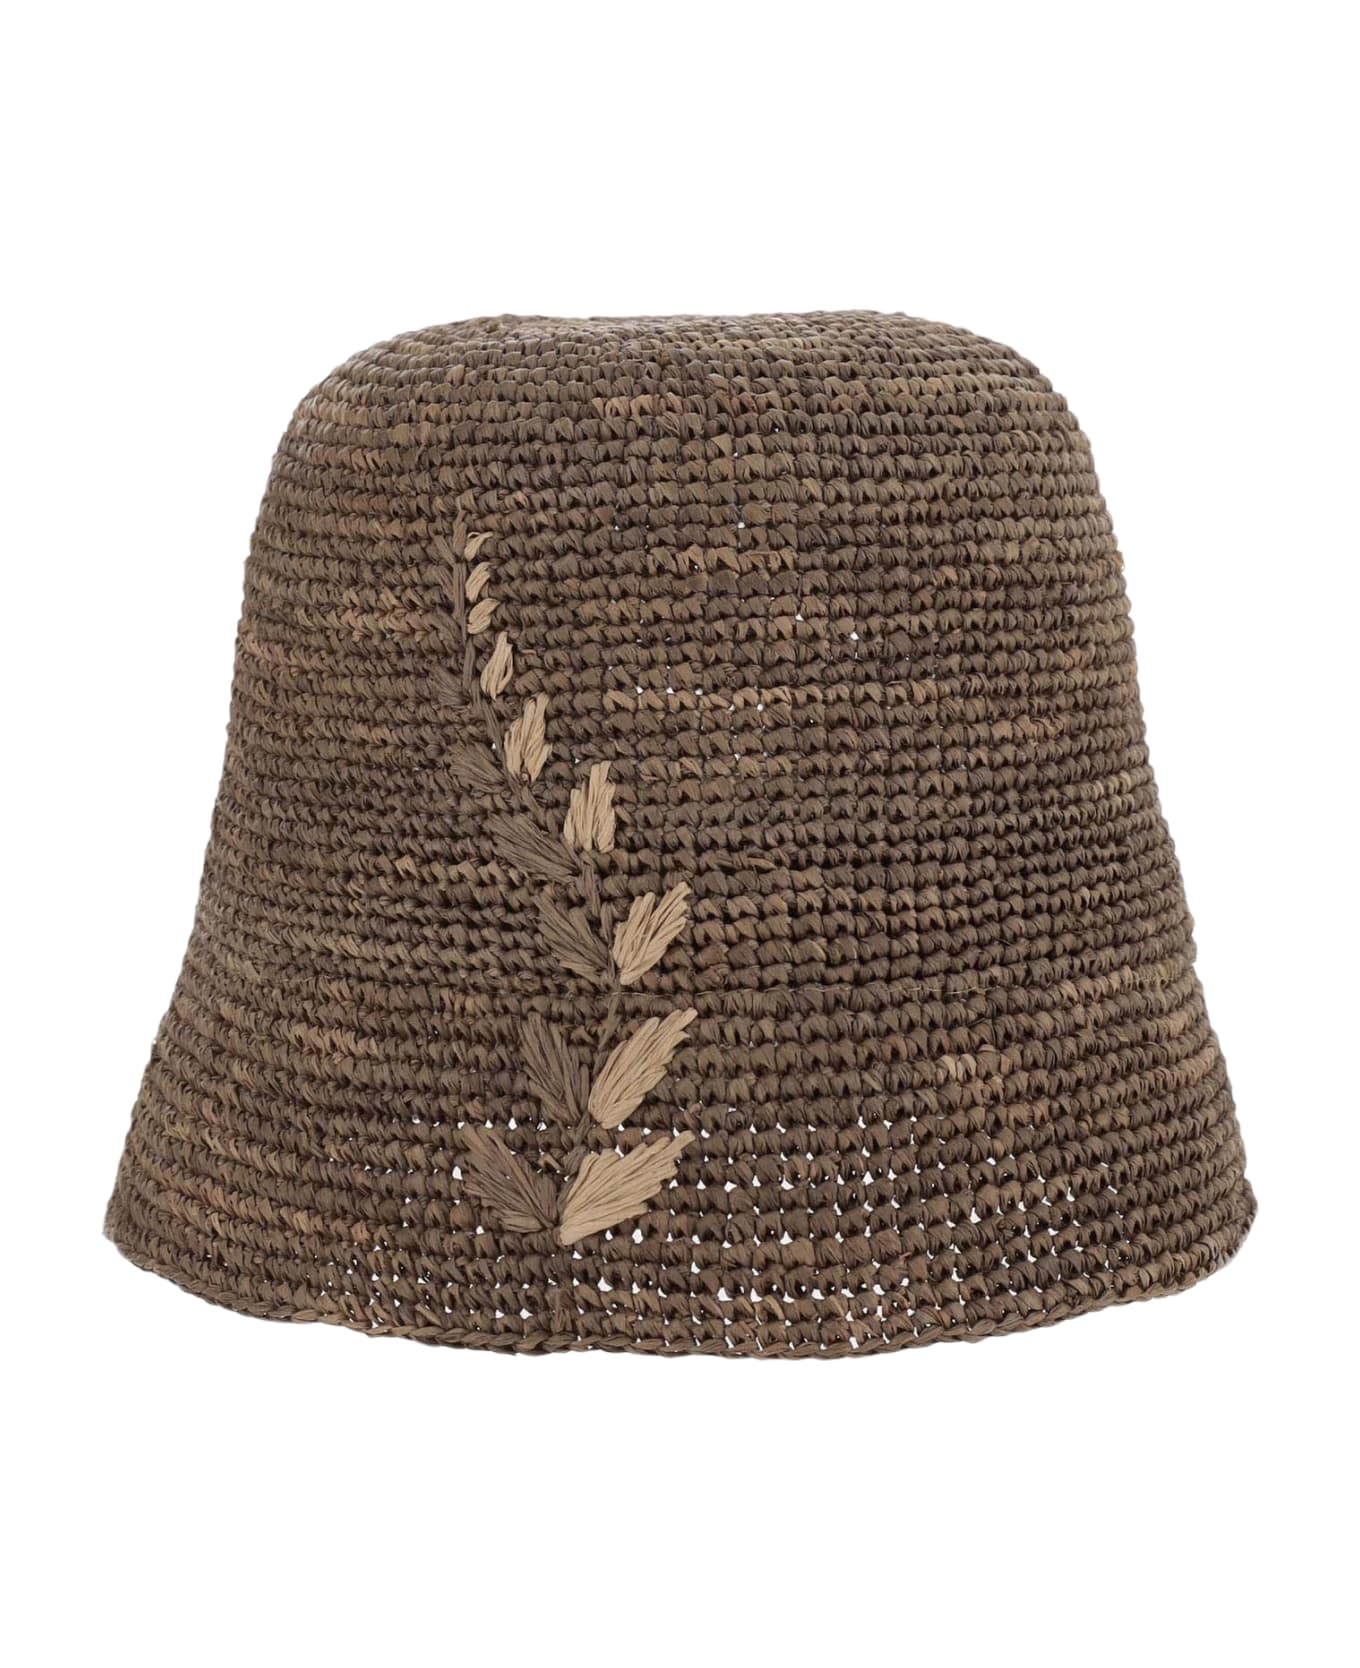 Ibeliv Raffia Hat With Floral Pattern - Brown